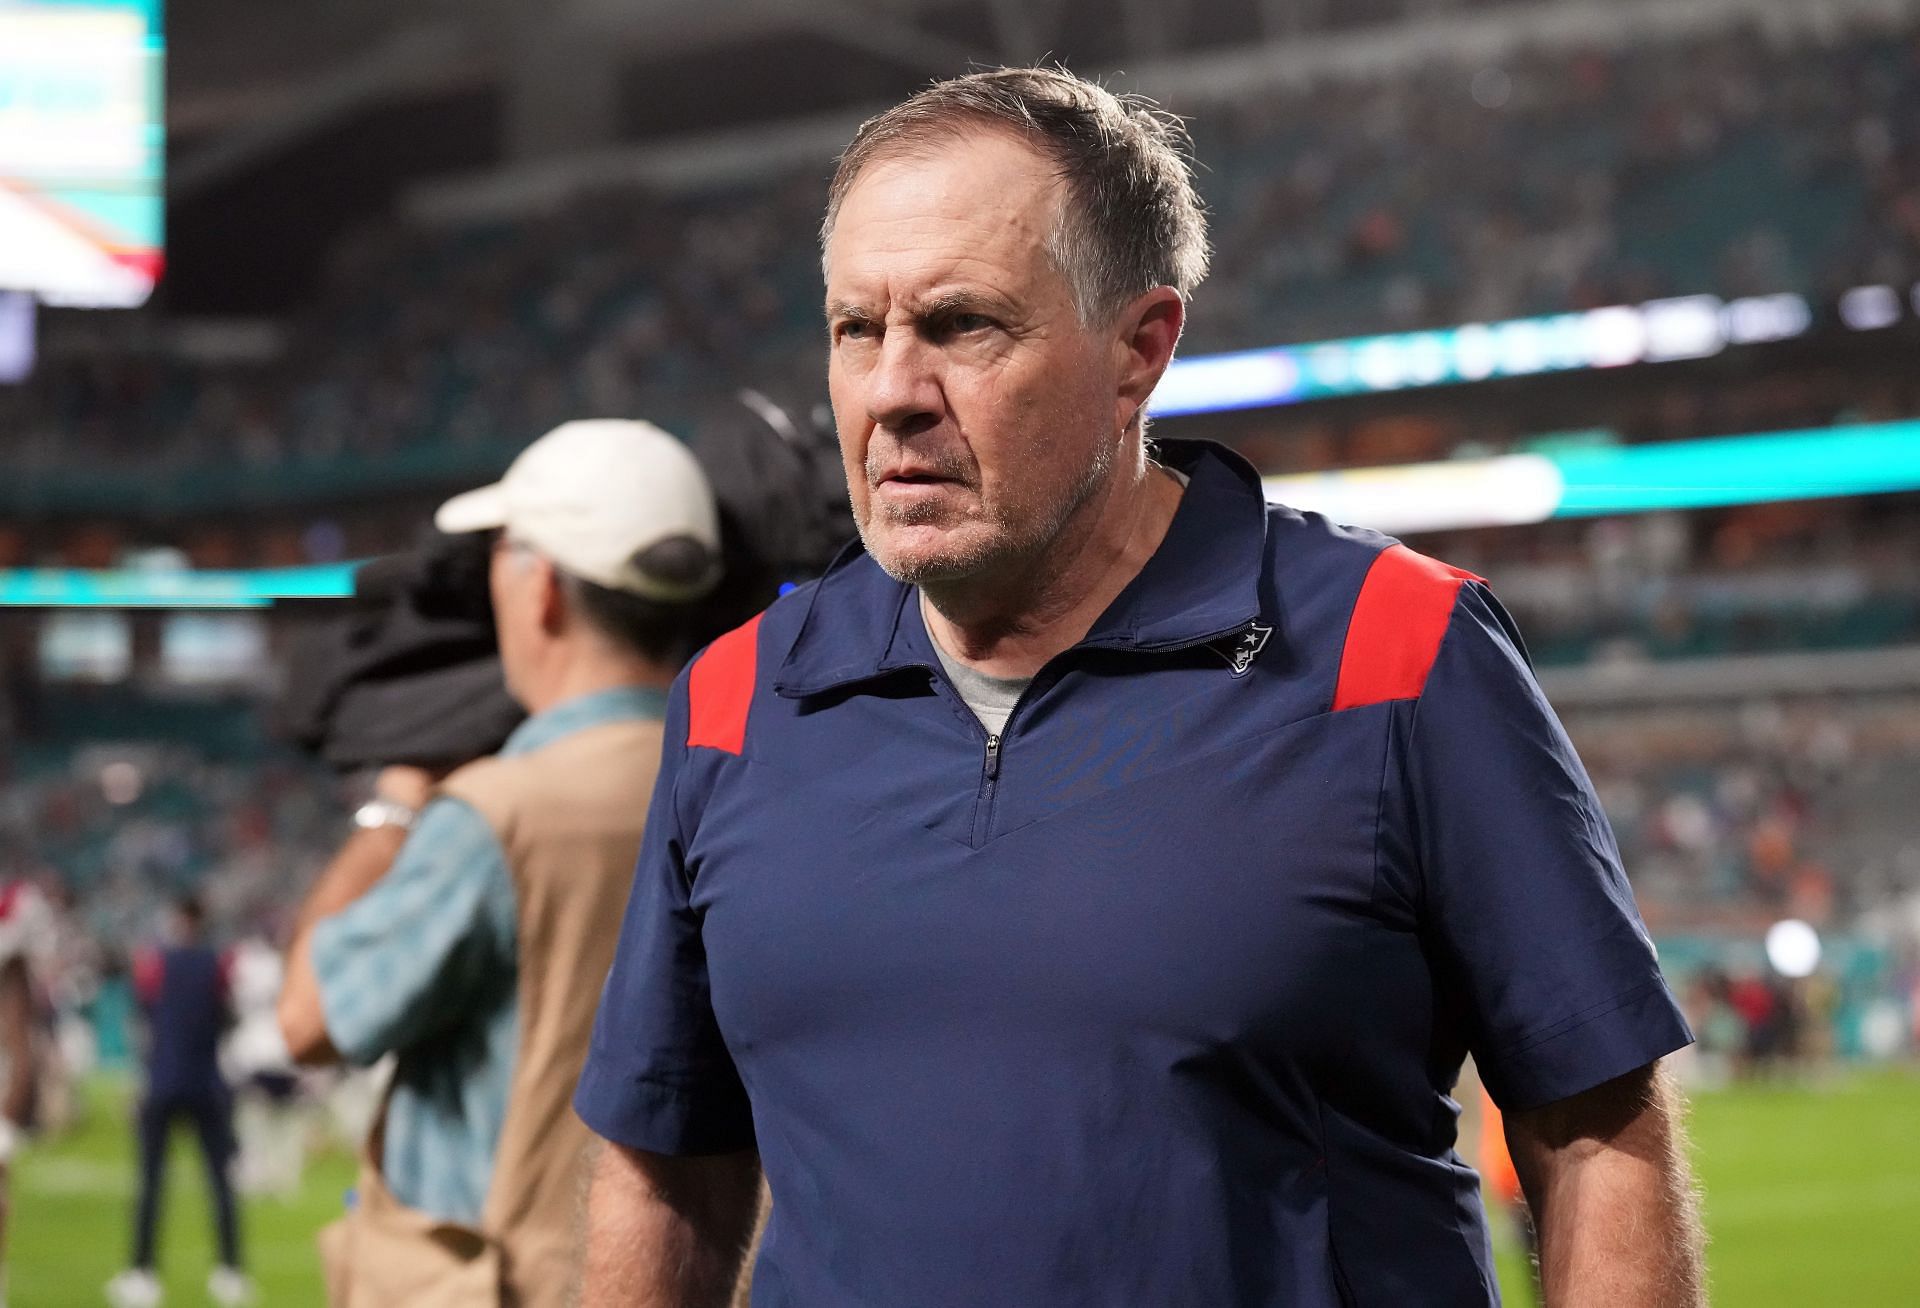 Bill Belichick is a 6x Super Bowl champion and still never looks satisfied.